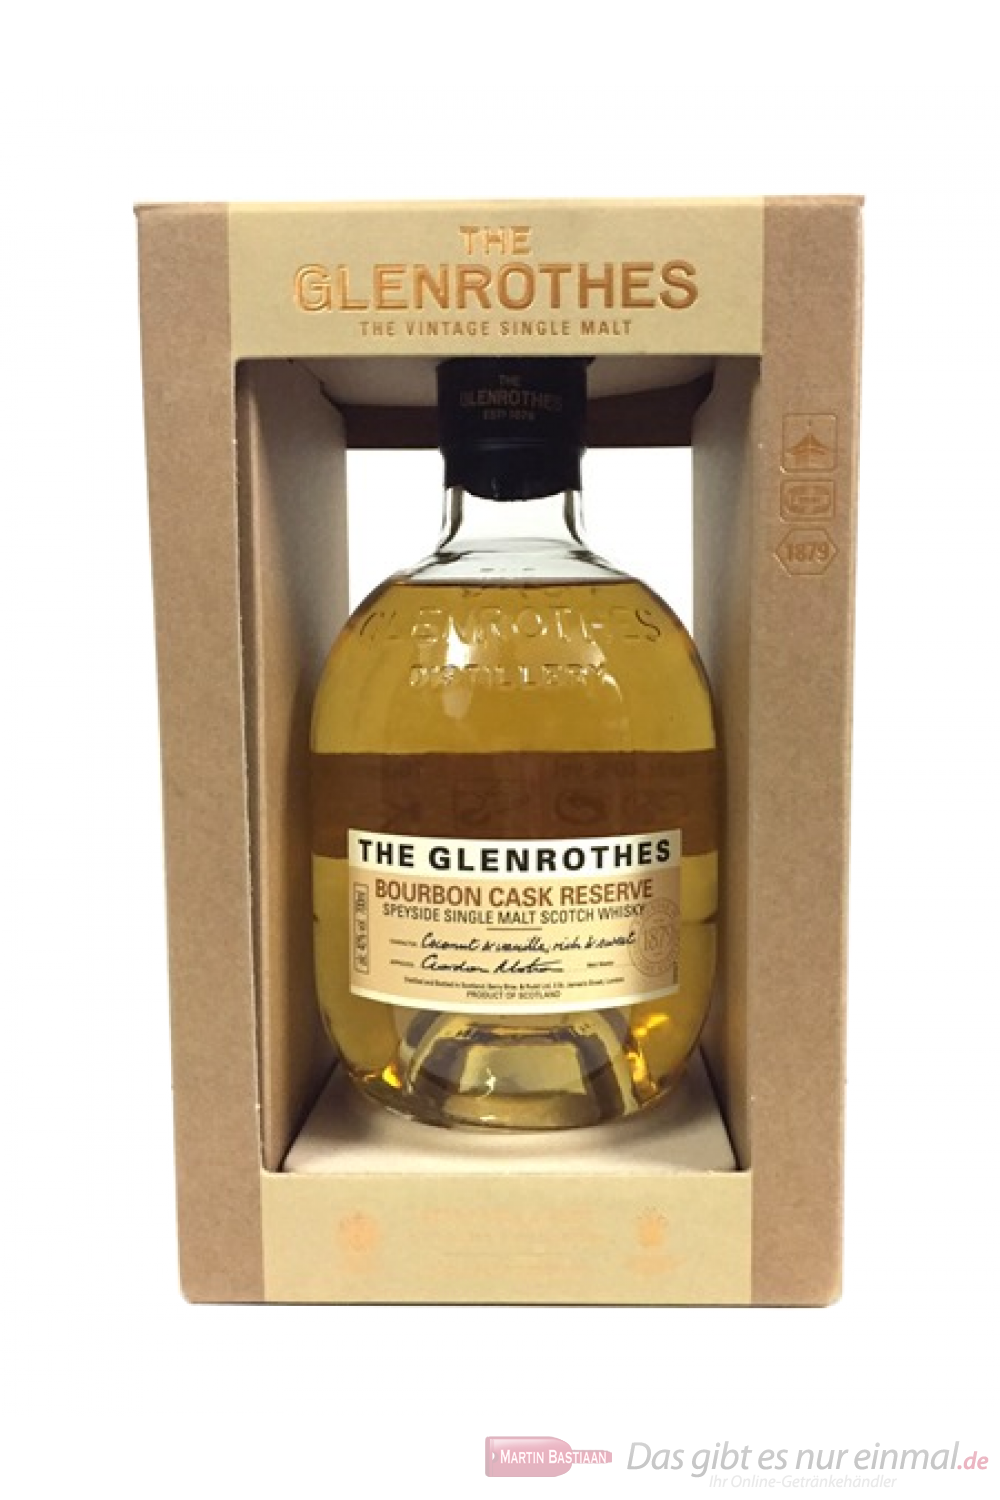 The Glenrothes Bourbon Cask